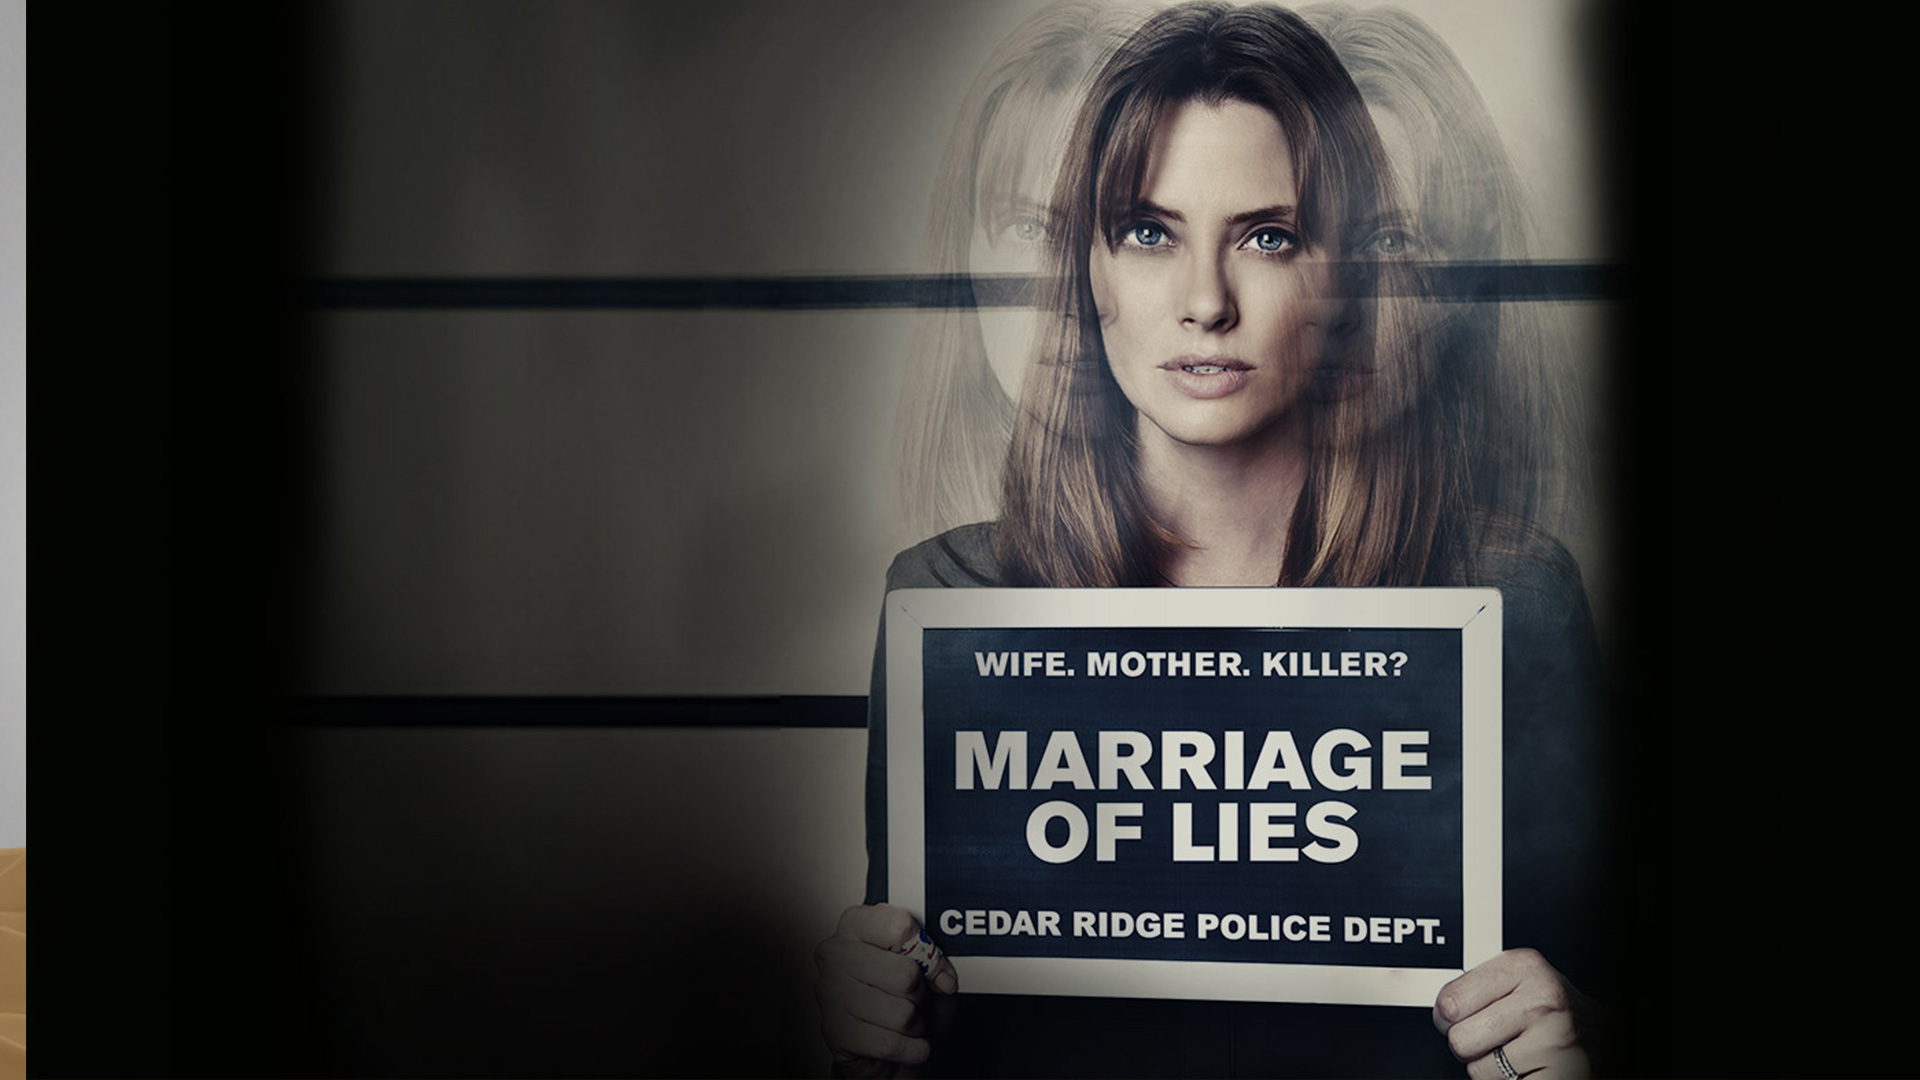 Marriage of Lies streaming: where to watch online?